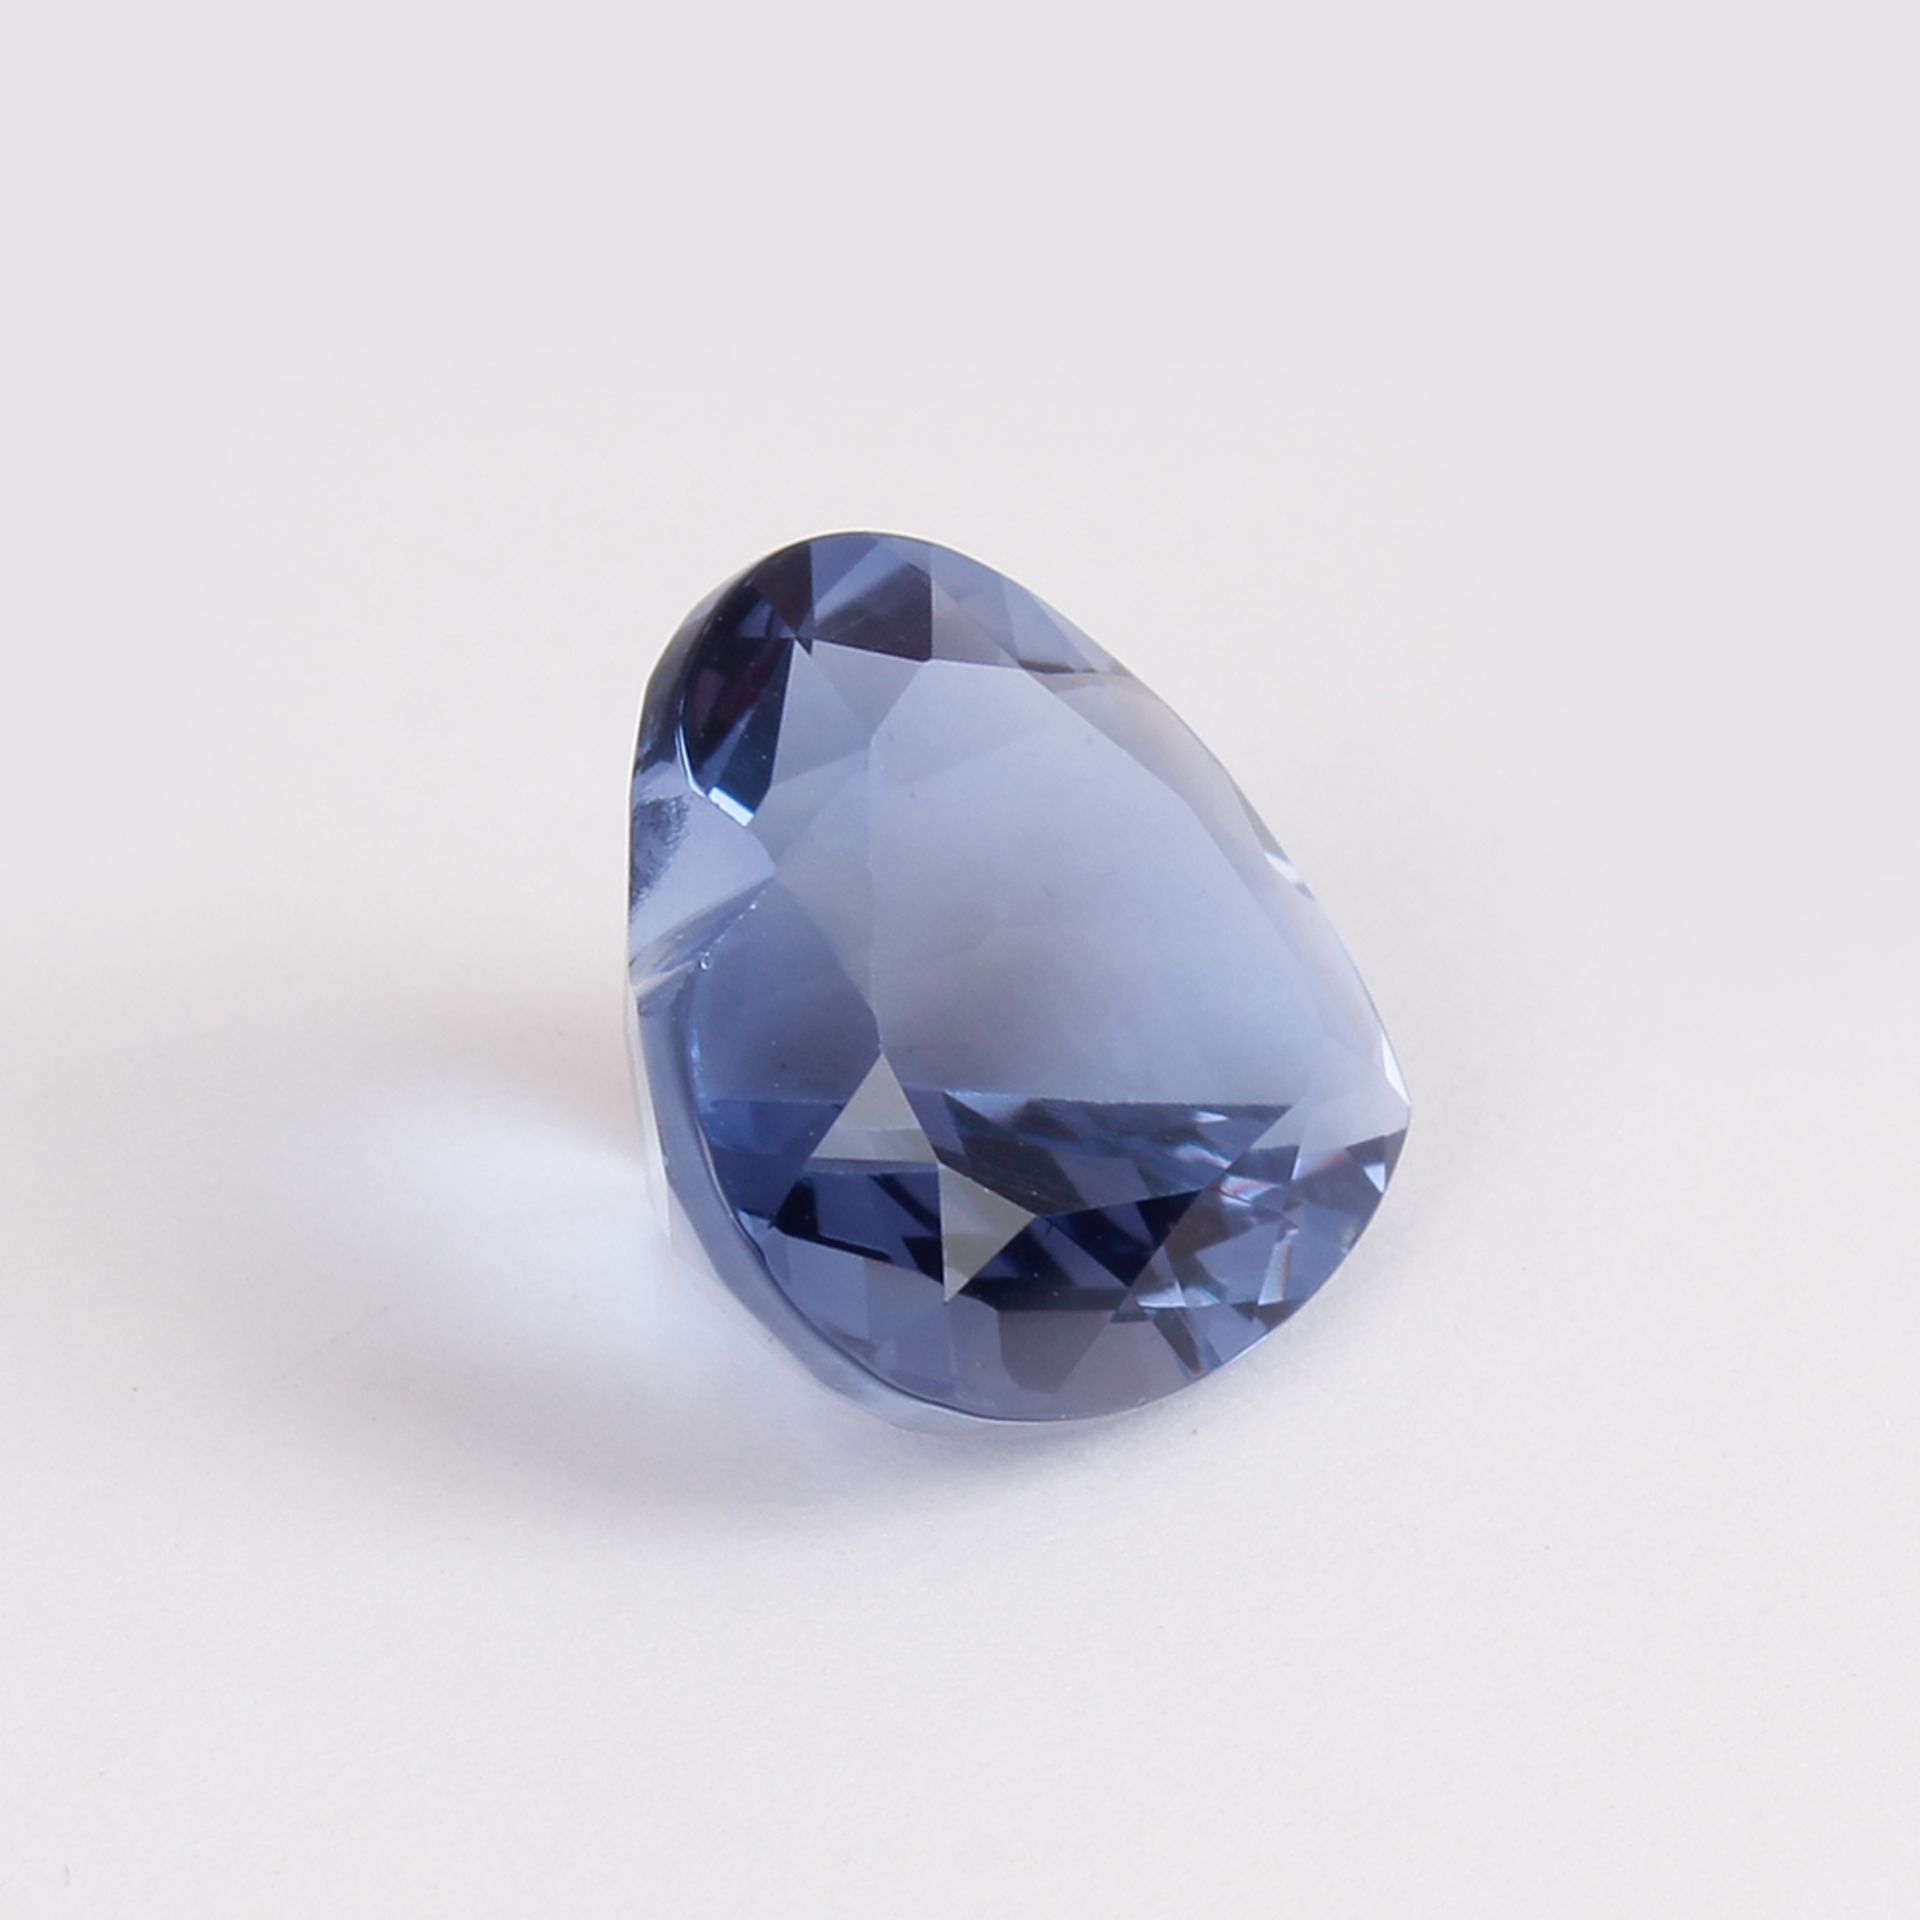 GFCO (Swiss) Certified 11.01 ct. Blue Fluorite - NAMIBIA - Image 3 of 6